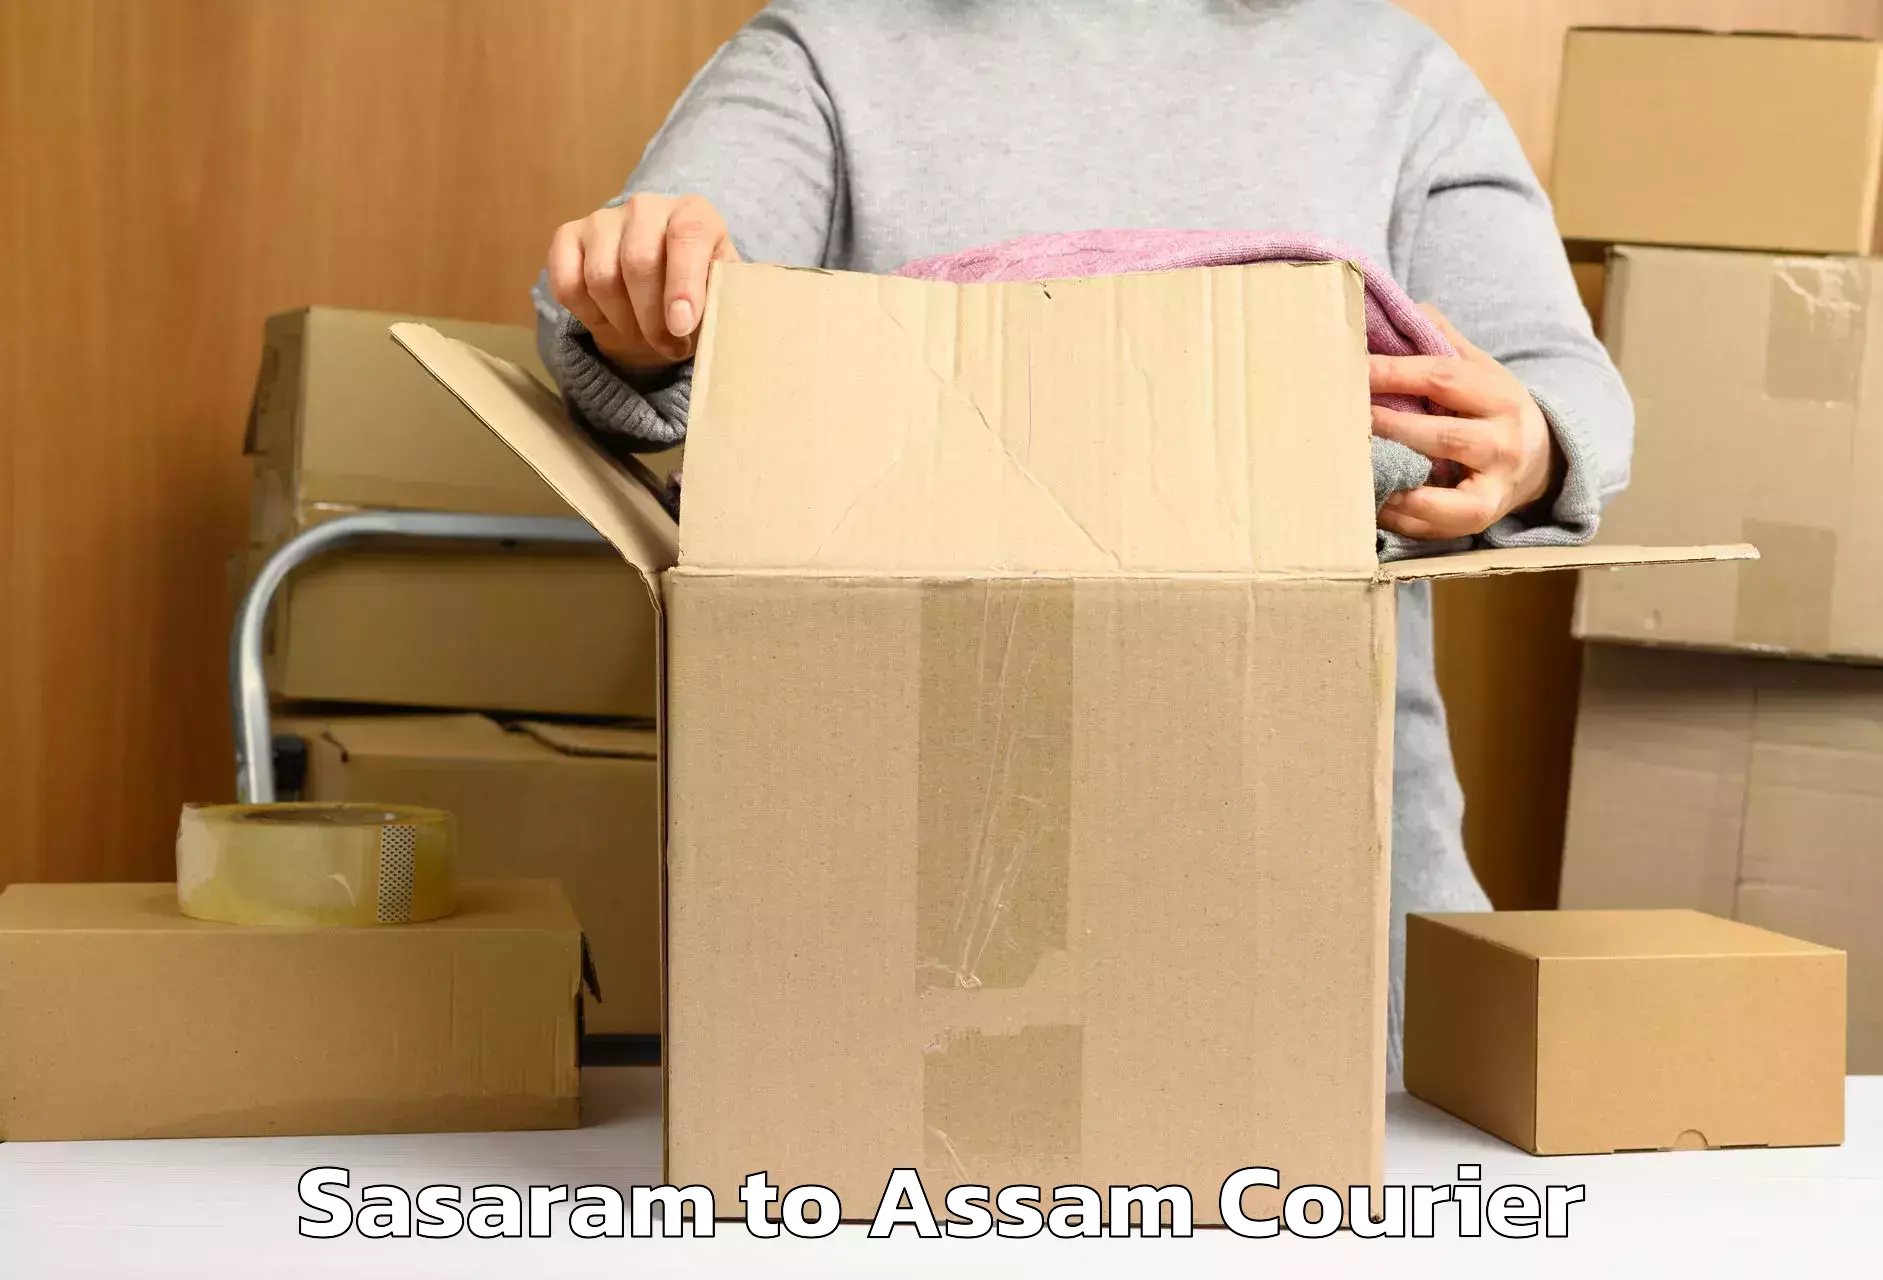 Luggage delivery estimate Sasaram to Assam